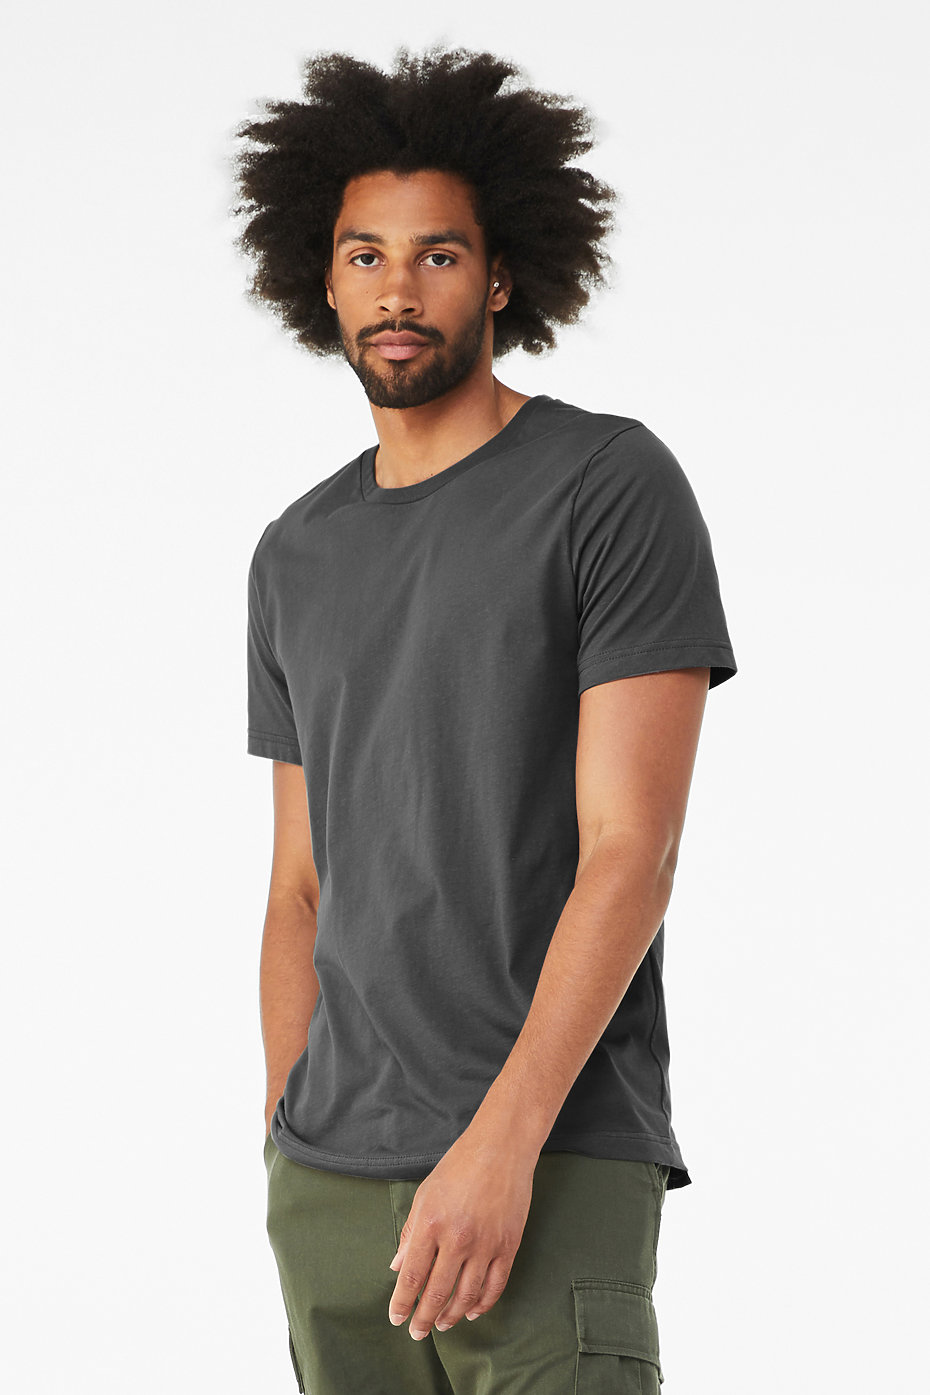 Winter Water Factory Ringer Tee - Solid Forest Green